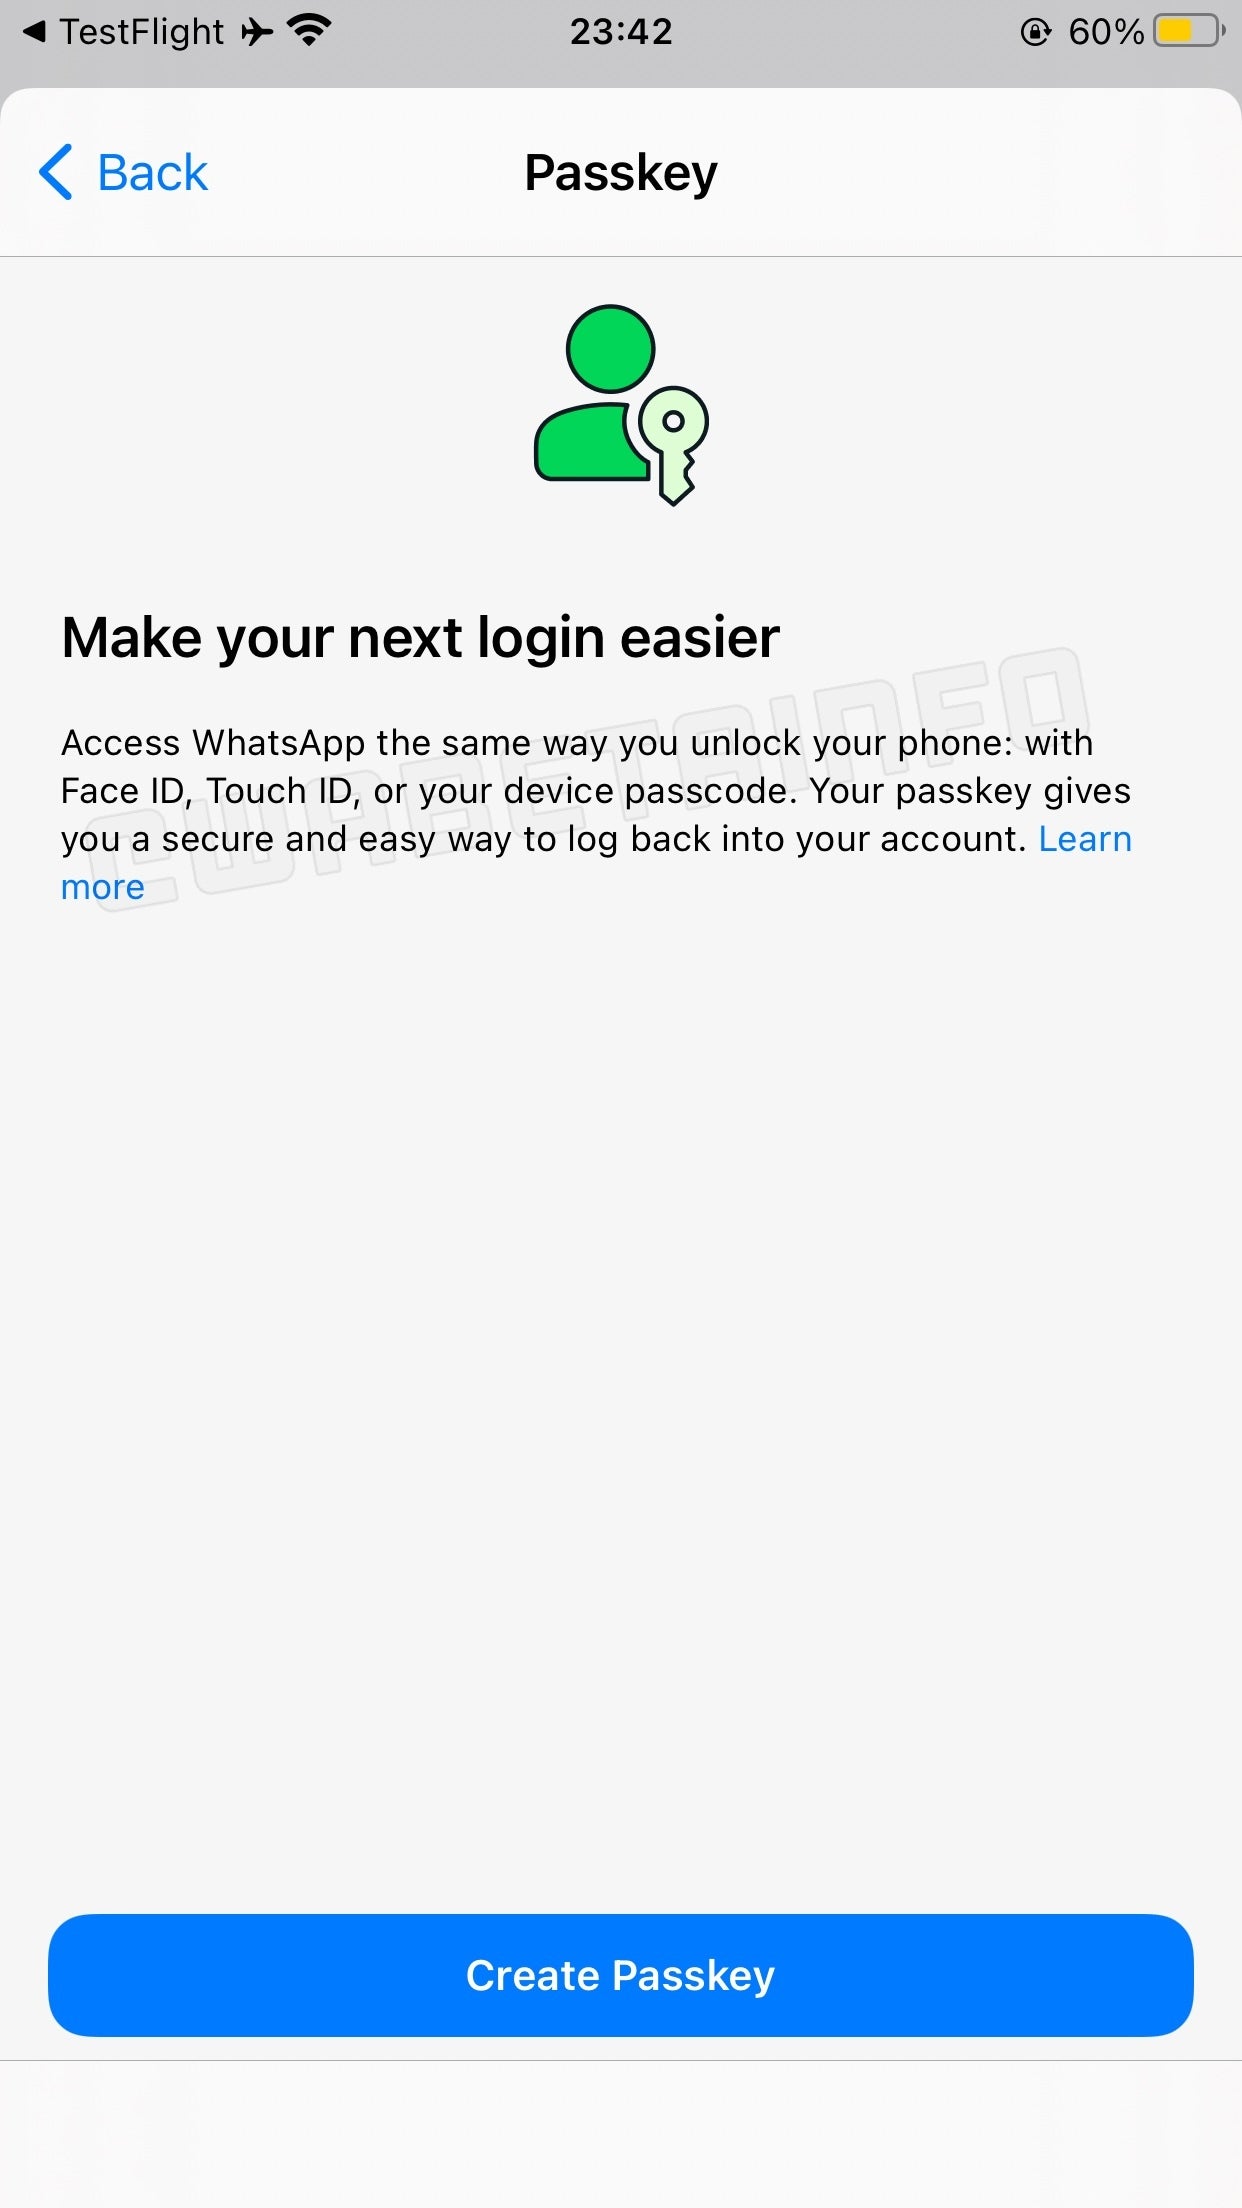 Image credit – WABetaInfo – WhatsApp could finally introduce passkey support for iOS users